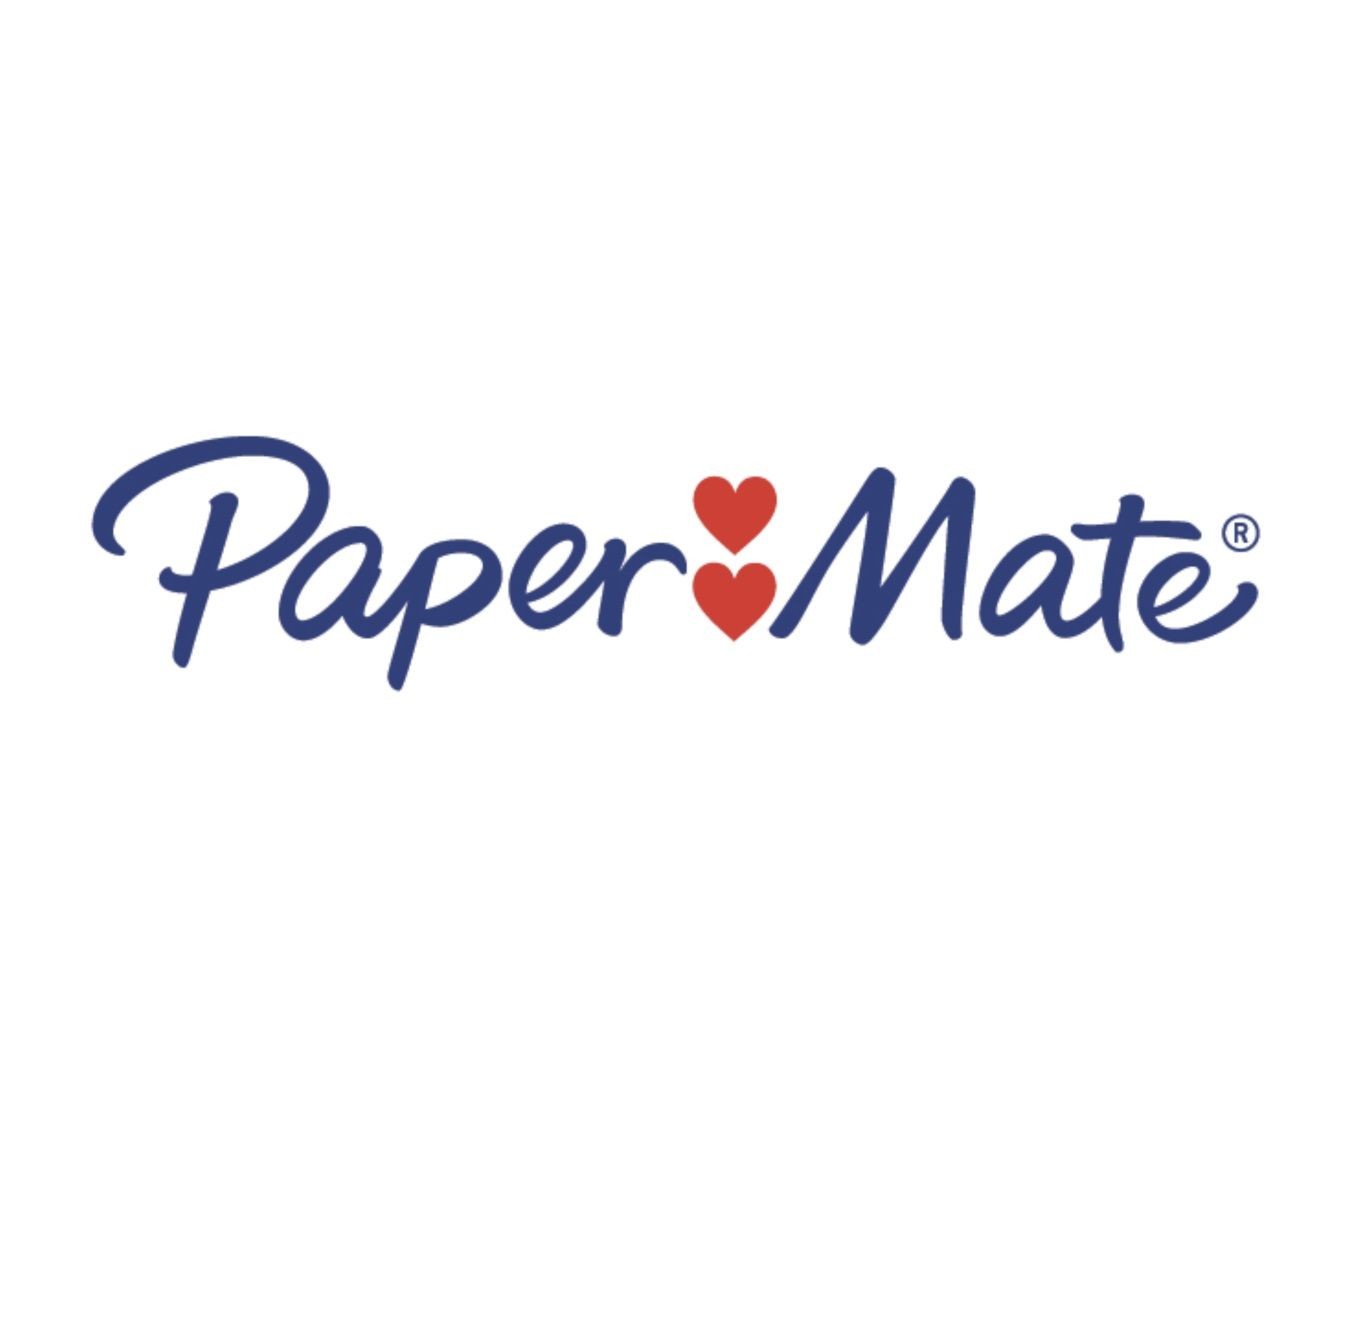 PAPERMATE